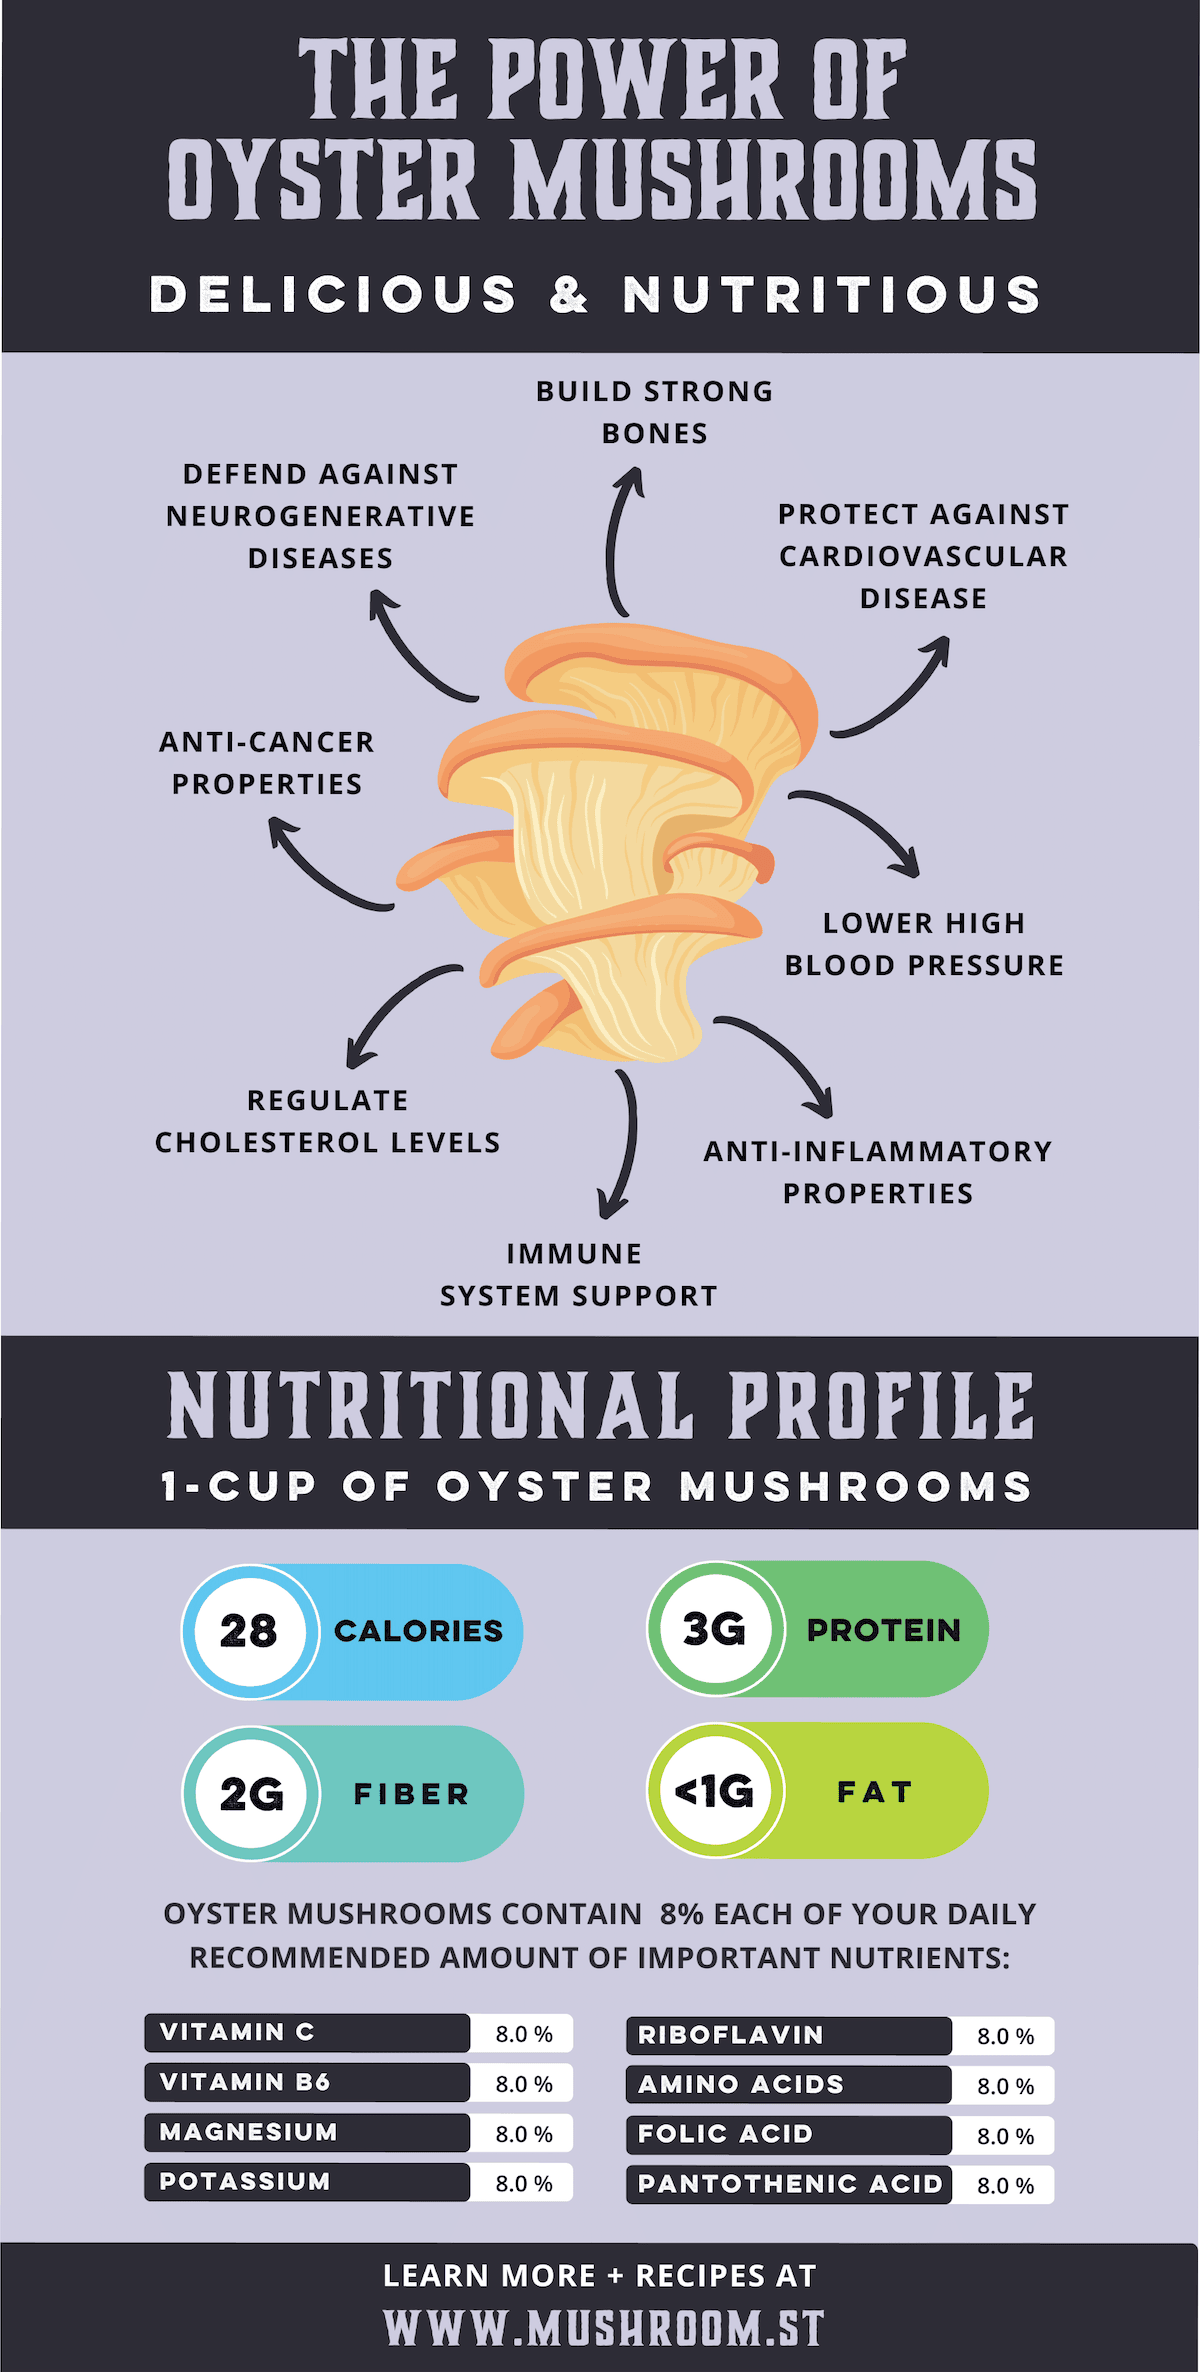 pdf on the benefits of oyster mushrooms